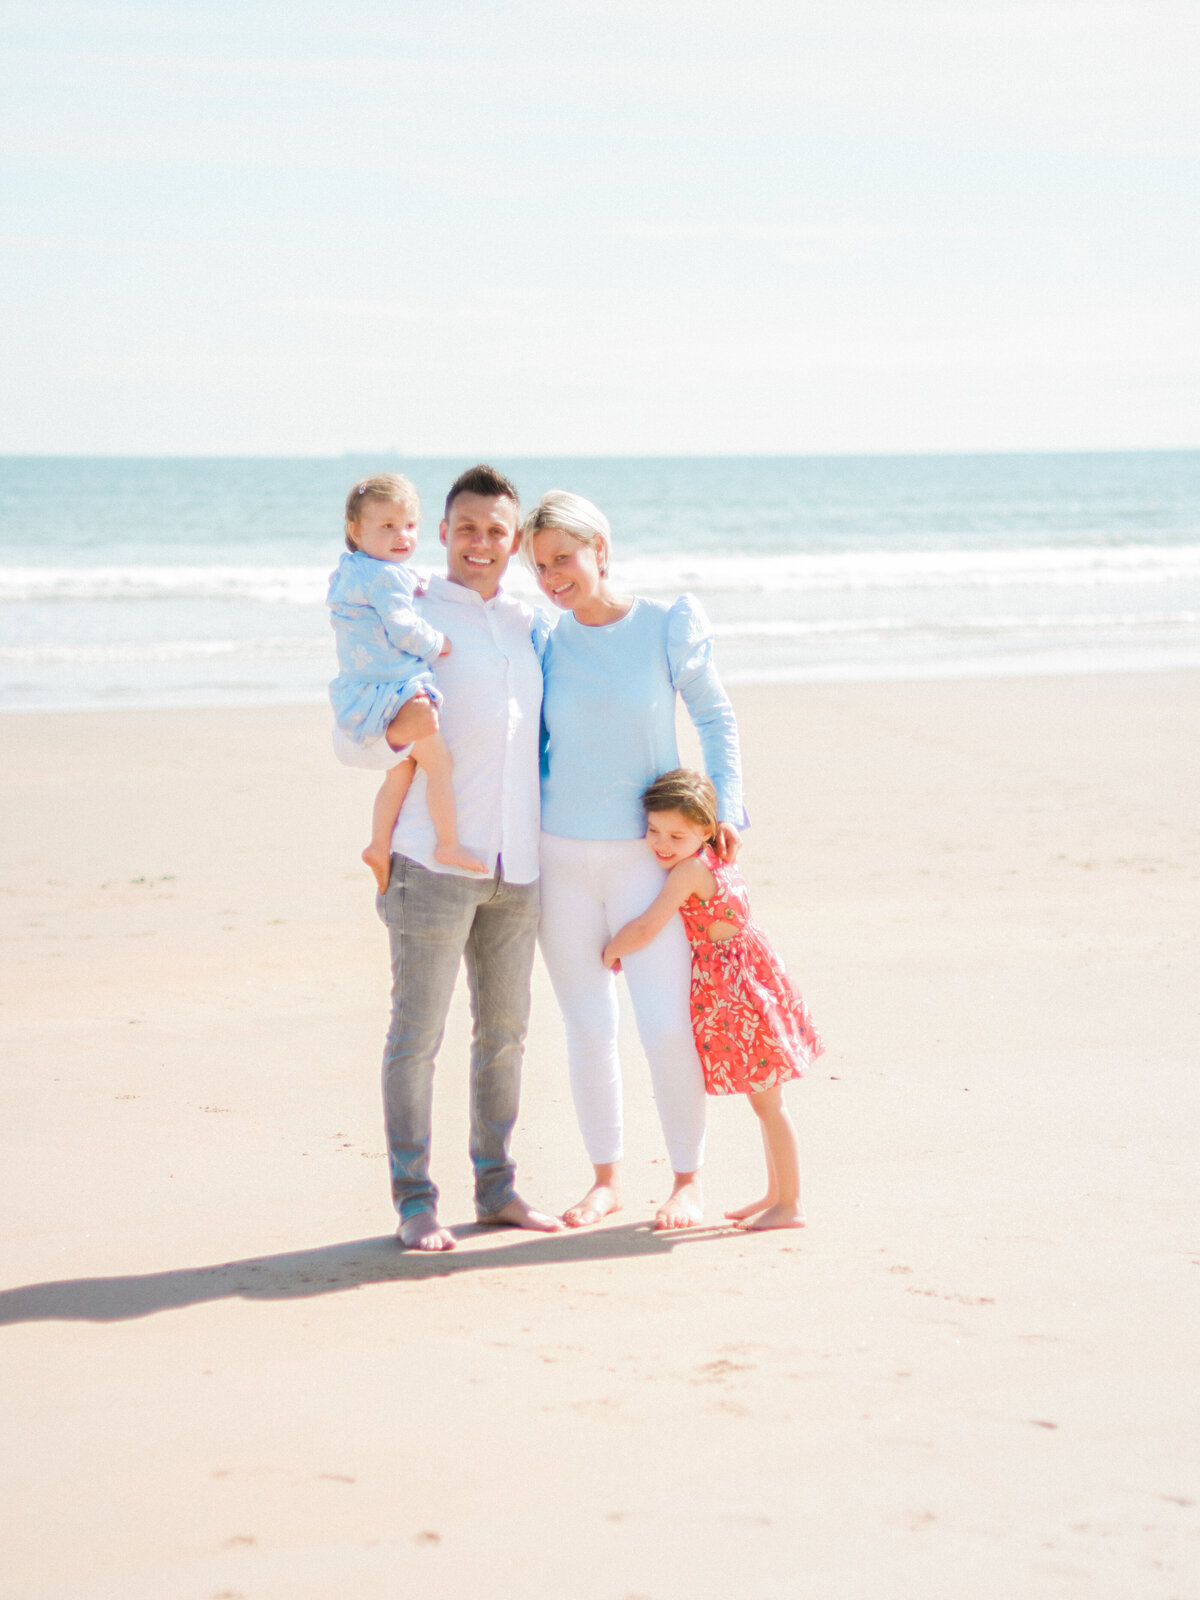 JacquelineAnnePhotography-Christie Family at Tyninghame -10